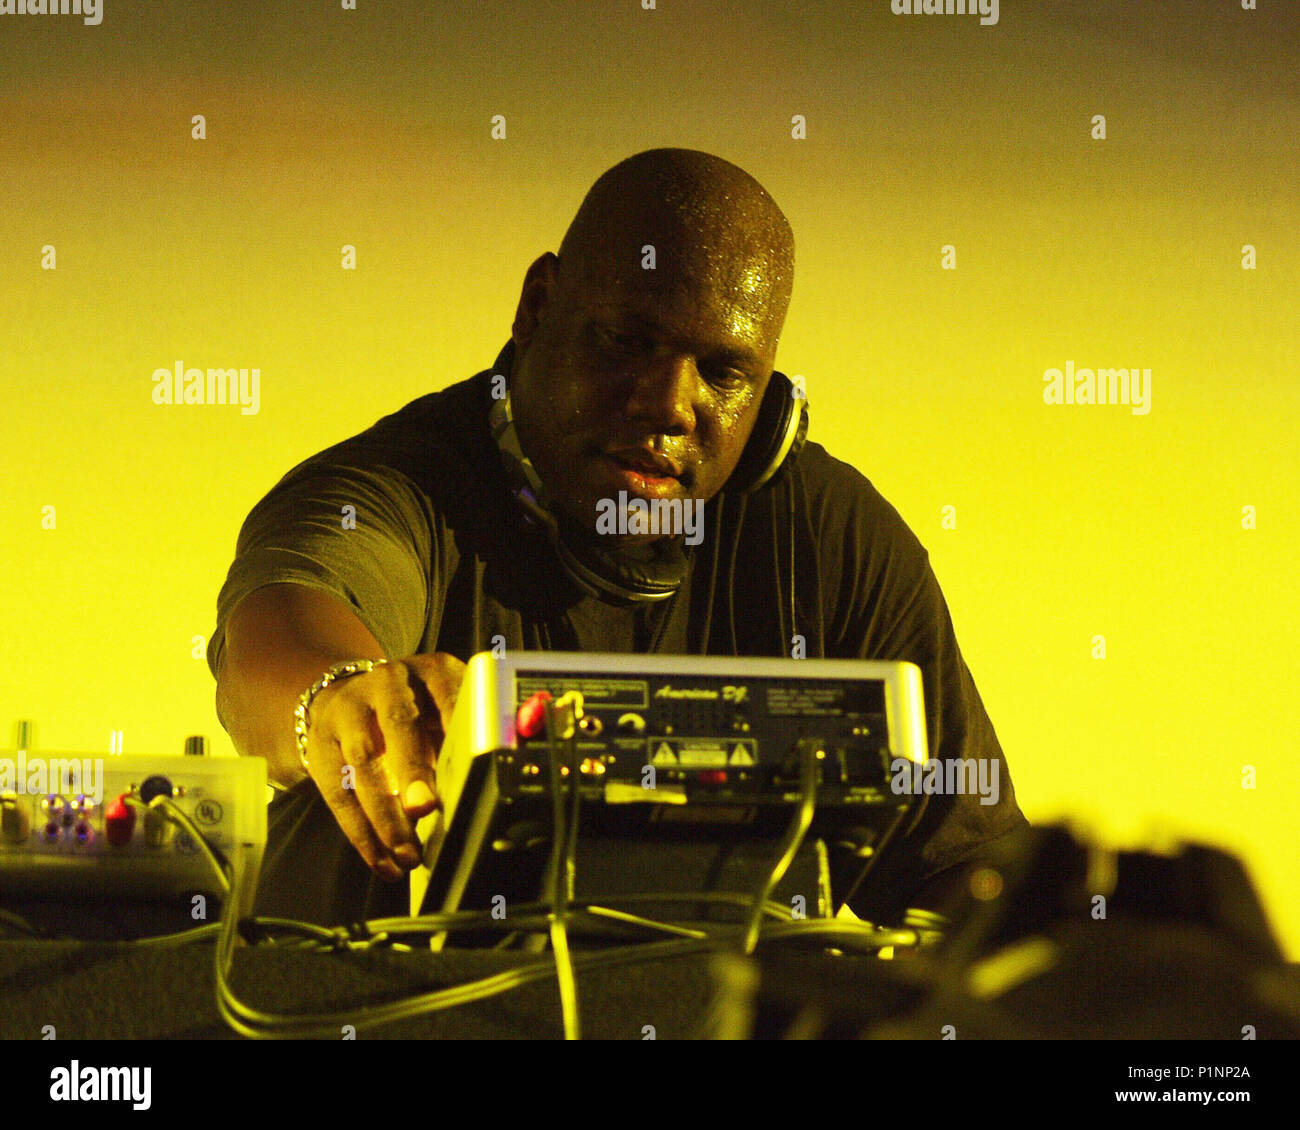 ATLANTA, GA - July 11: DJ Carl Cox performs during the very first stop of the AREA : ONE Festival at Lakewood Amphitheatre in Atlanta, Georgia on July 11, 2001. CREDIT: Chris McKay / MediaPunch Stock Photo